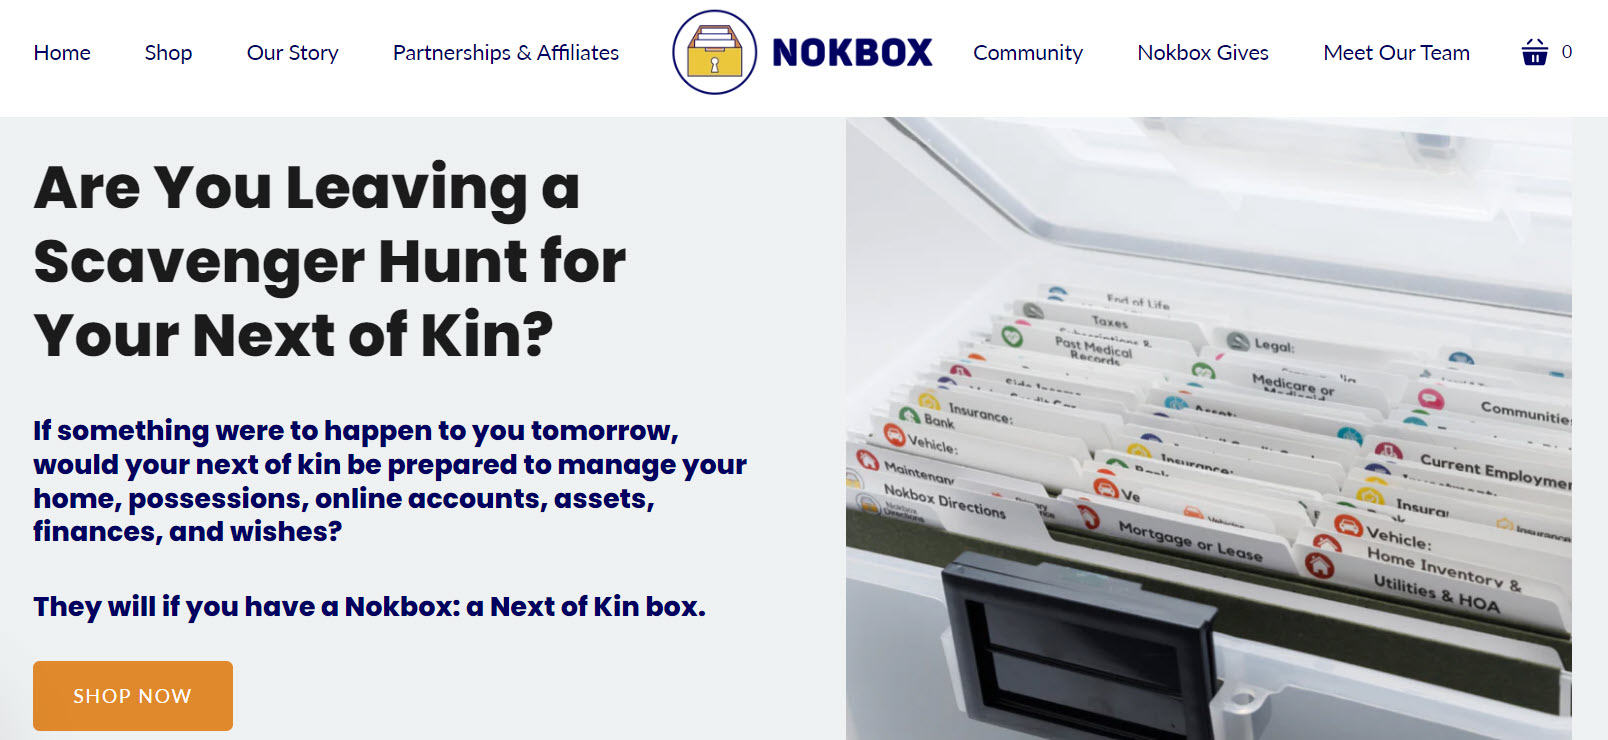 Nokbox: Organizing for Your Next of Kin: Are You Leaving a Scavenger Hunt for Your Next of Kin?